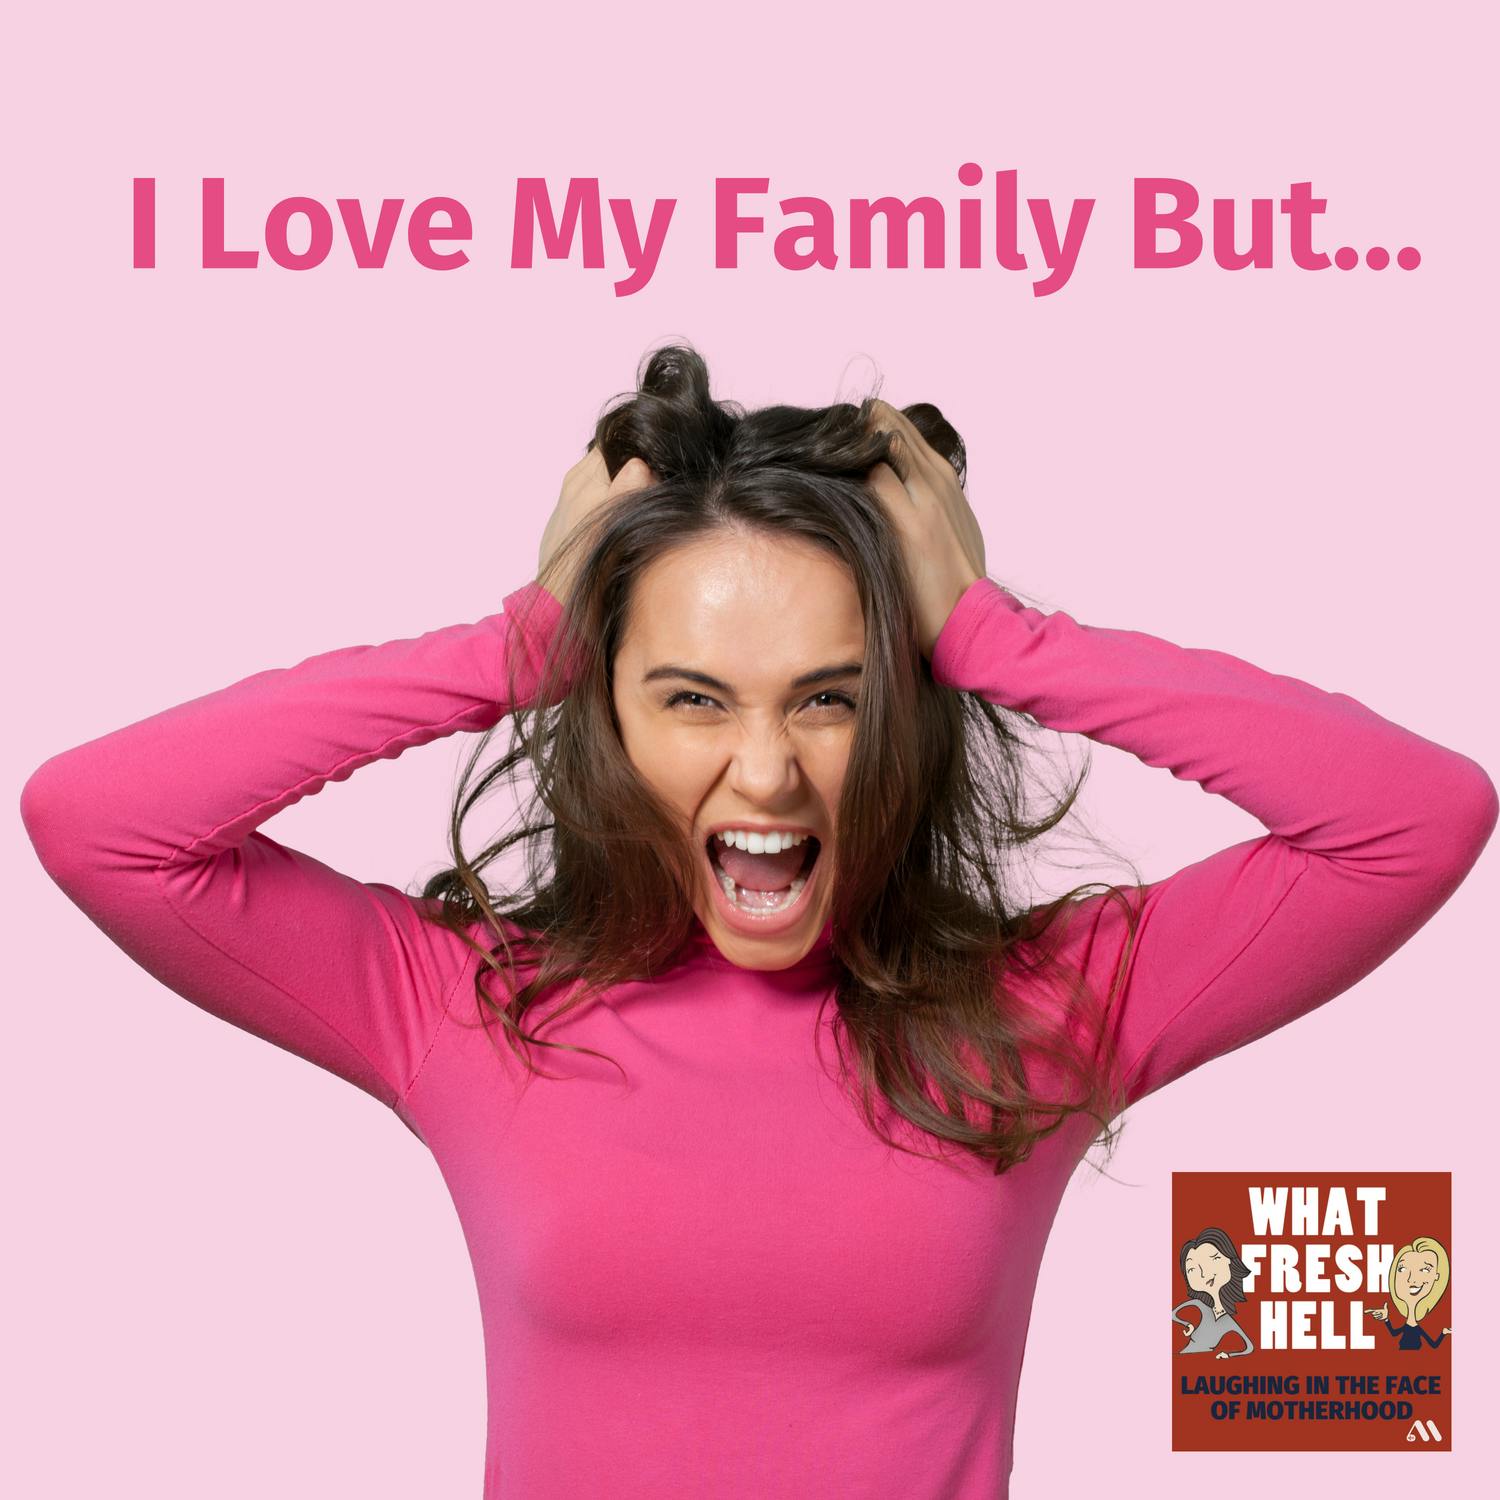 I Love My Family But...